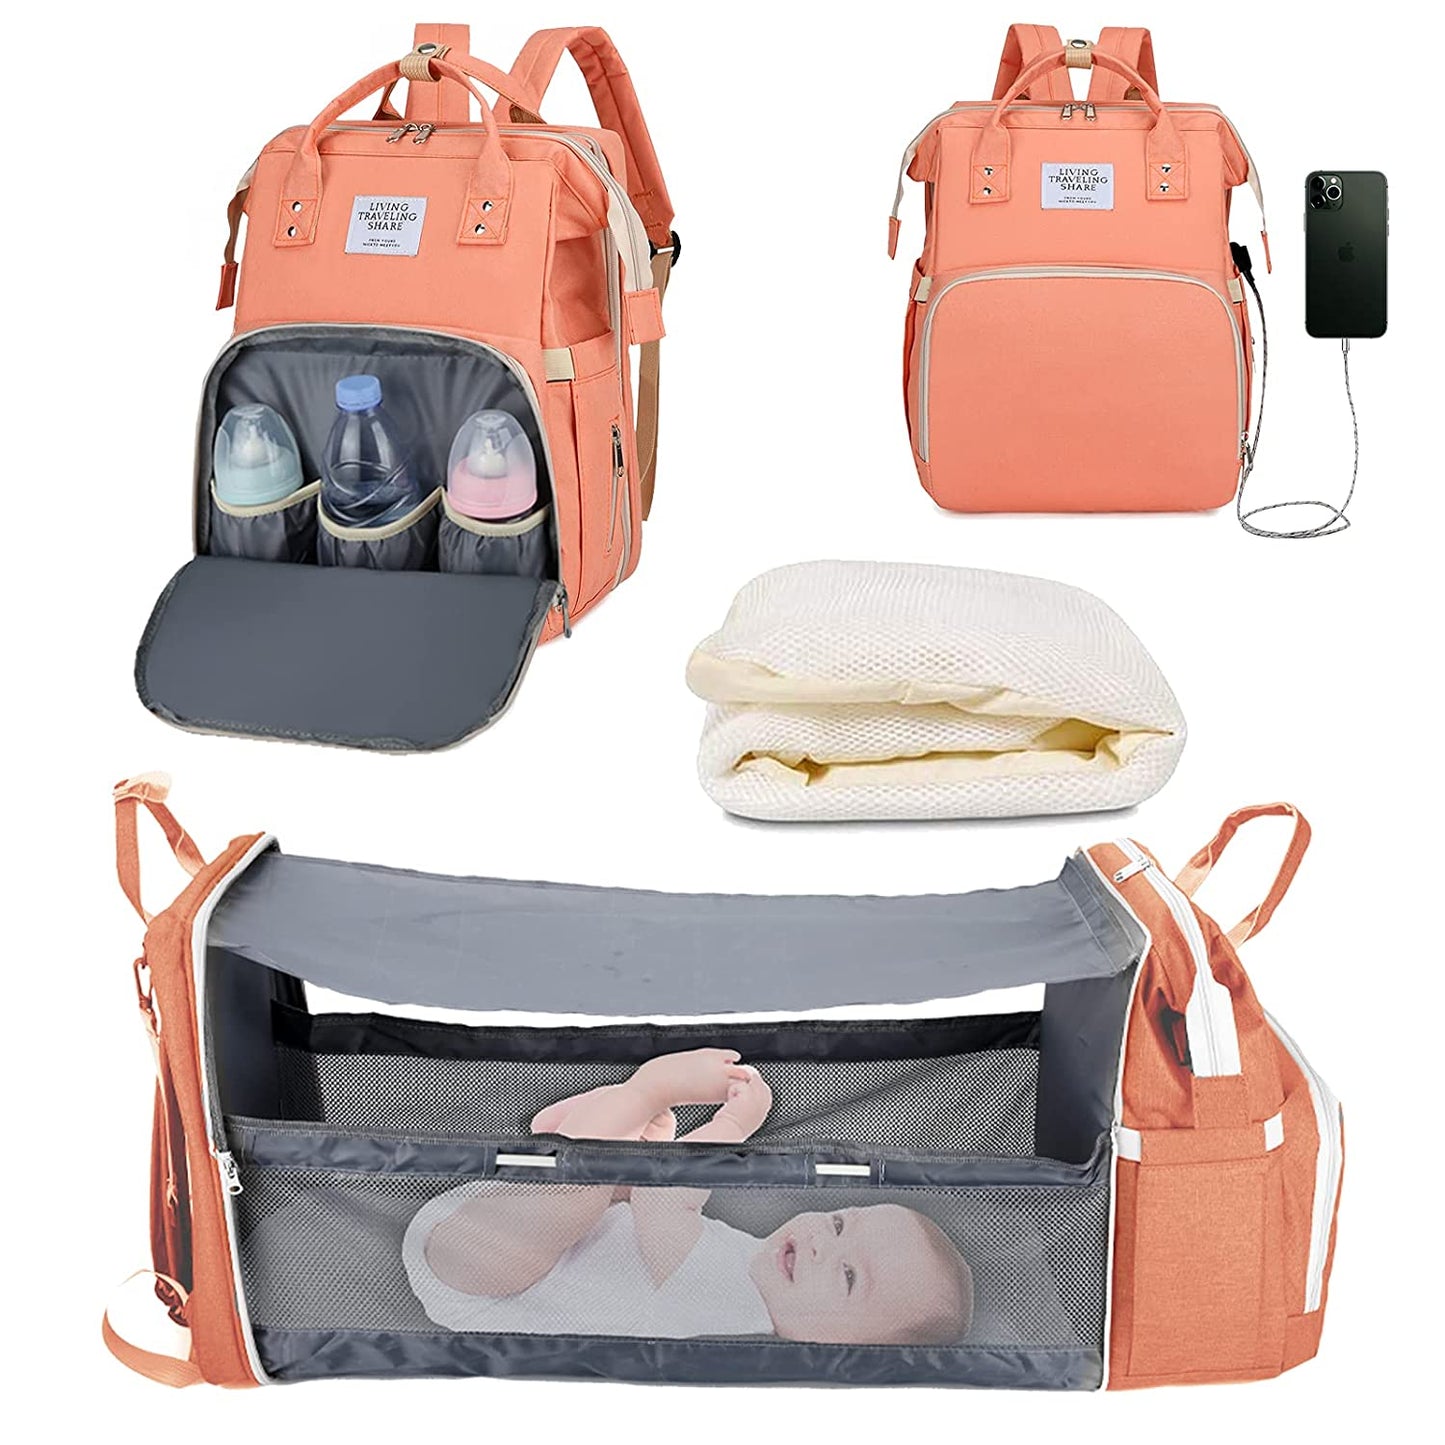 Ultimate Mommy Bag: 3-in-1 Portable Baby Bed, Changing Pad, and Diaper Bag